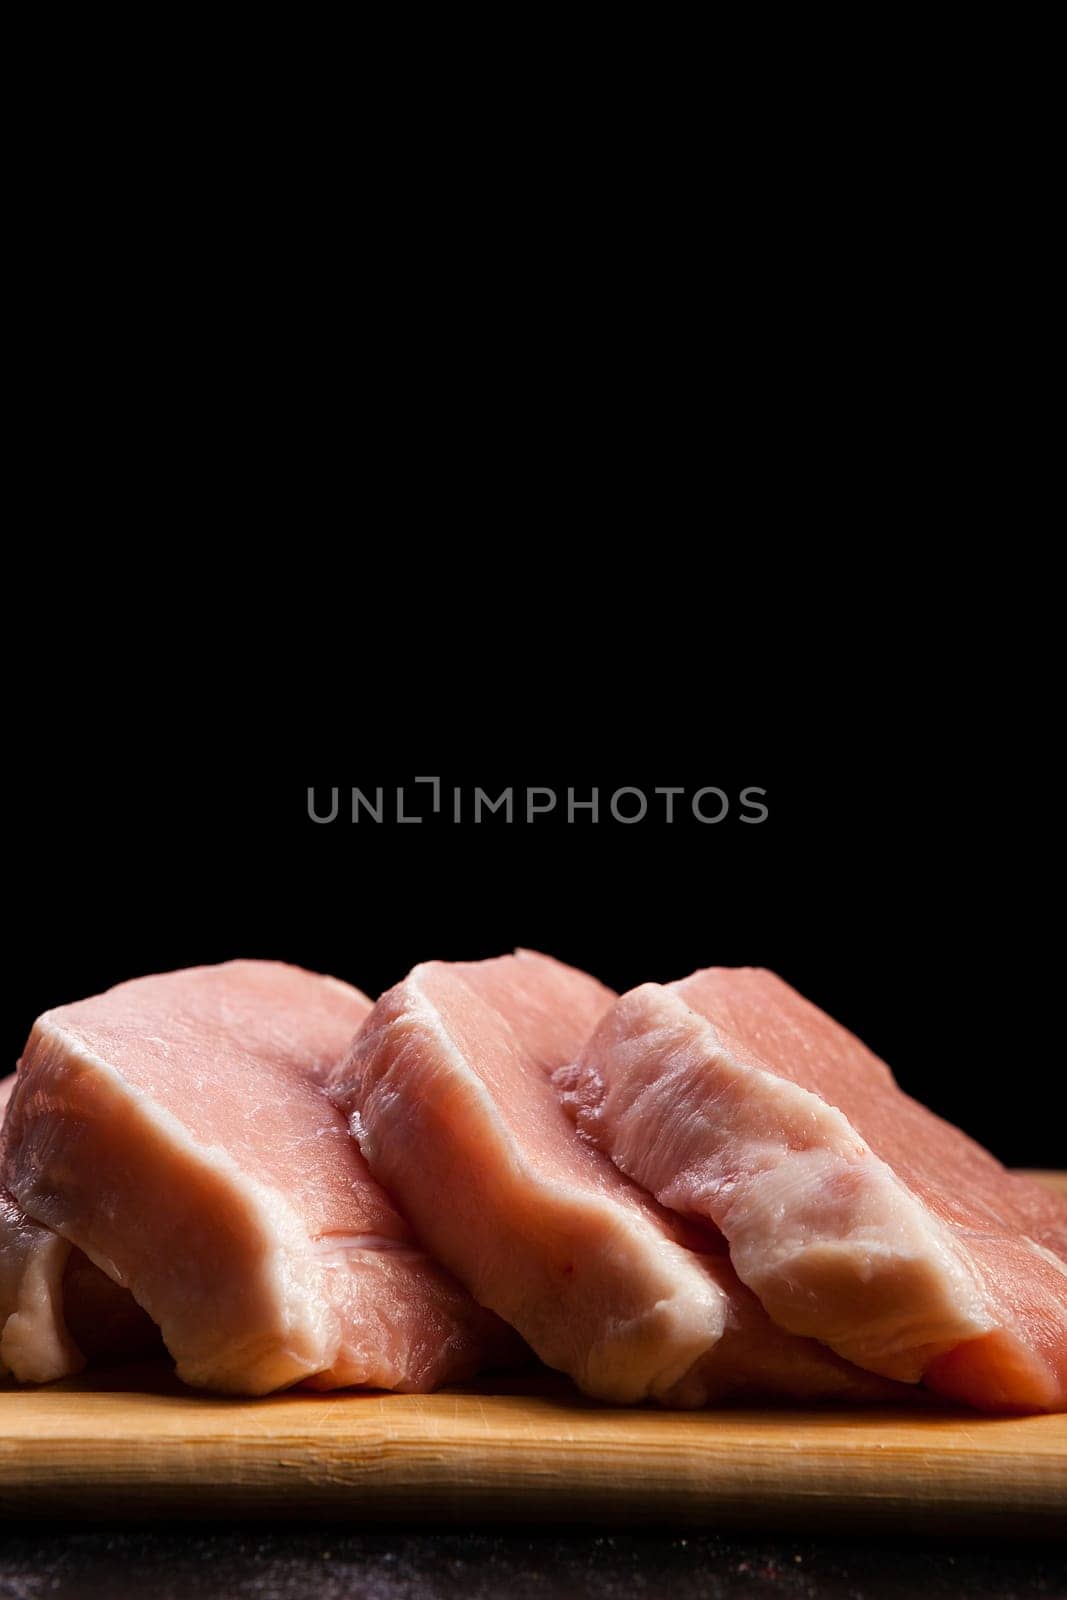 four pieces of fresh raw meat on wooden board on black wooden background. Gourmet food and fresh uncooked meal